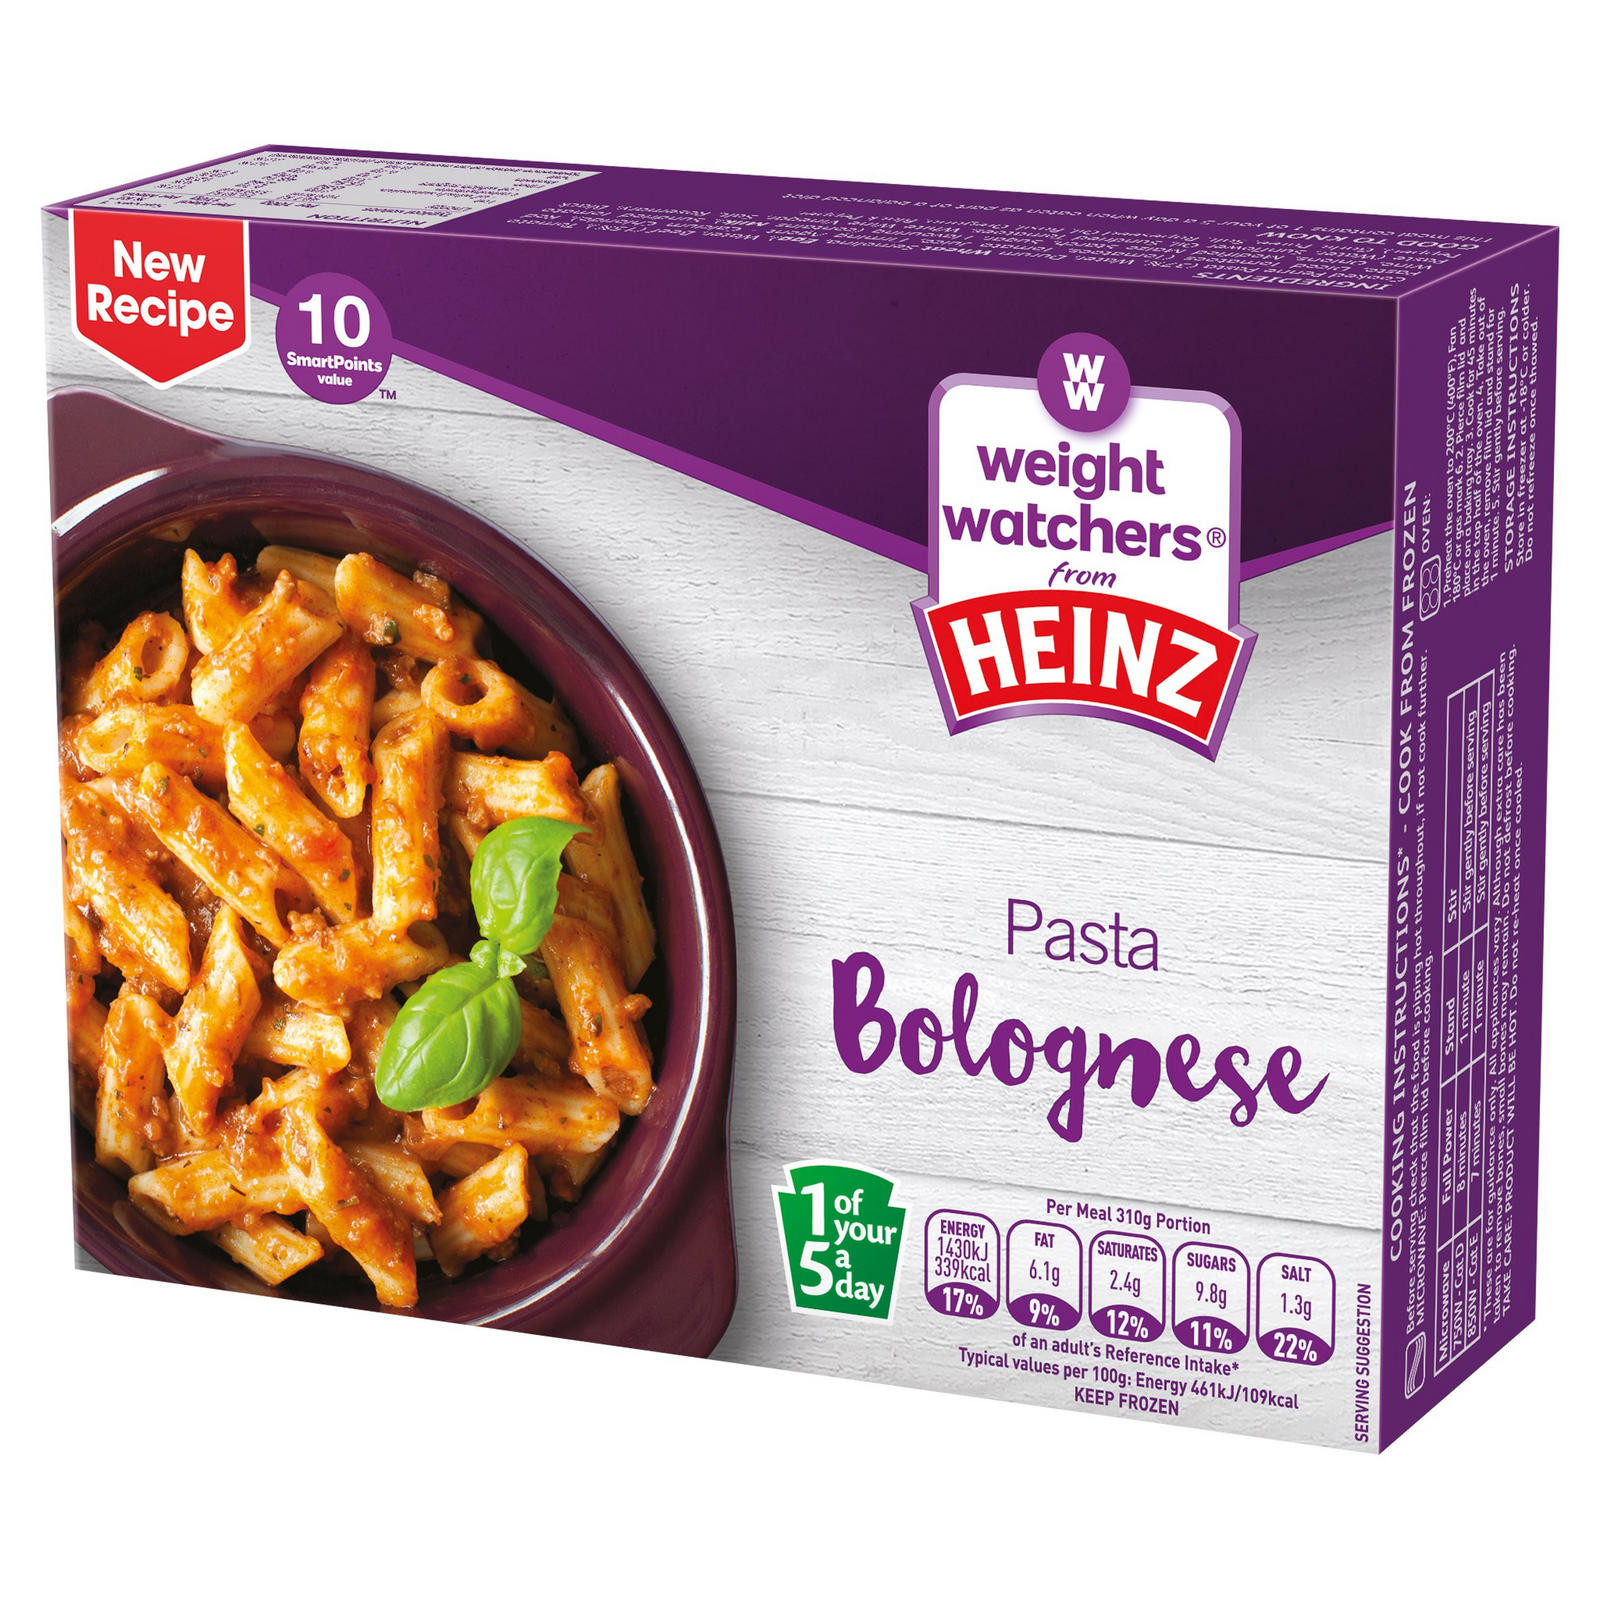 Spaghetti Weight Watchers Points
 Weight Watchers from Heinz Pasta Bolognese 310g